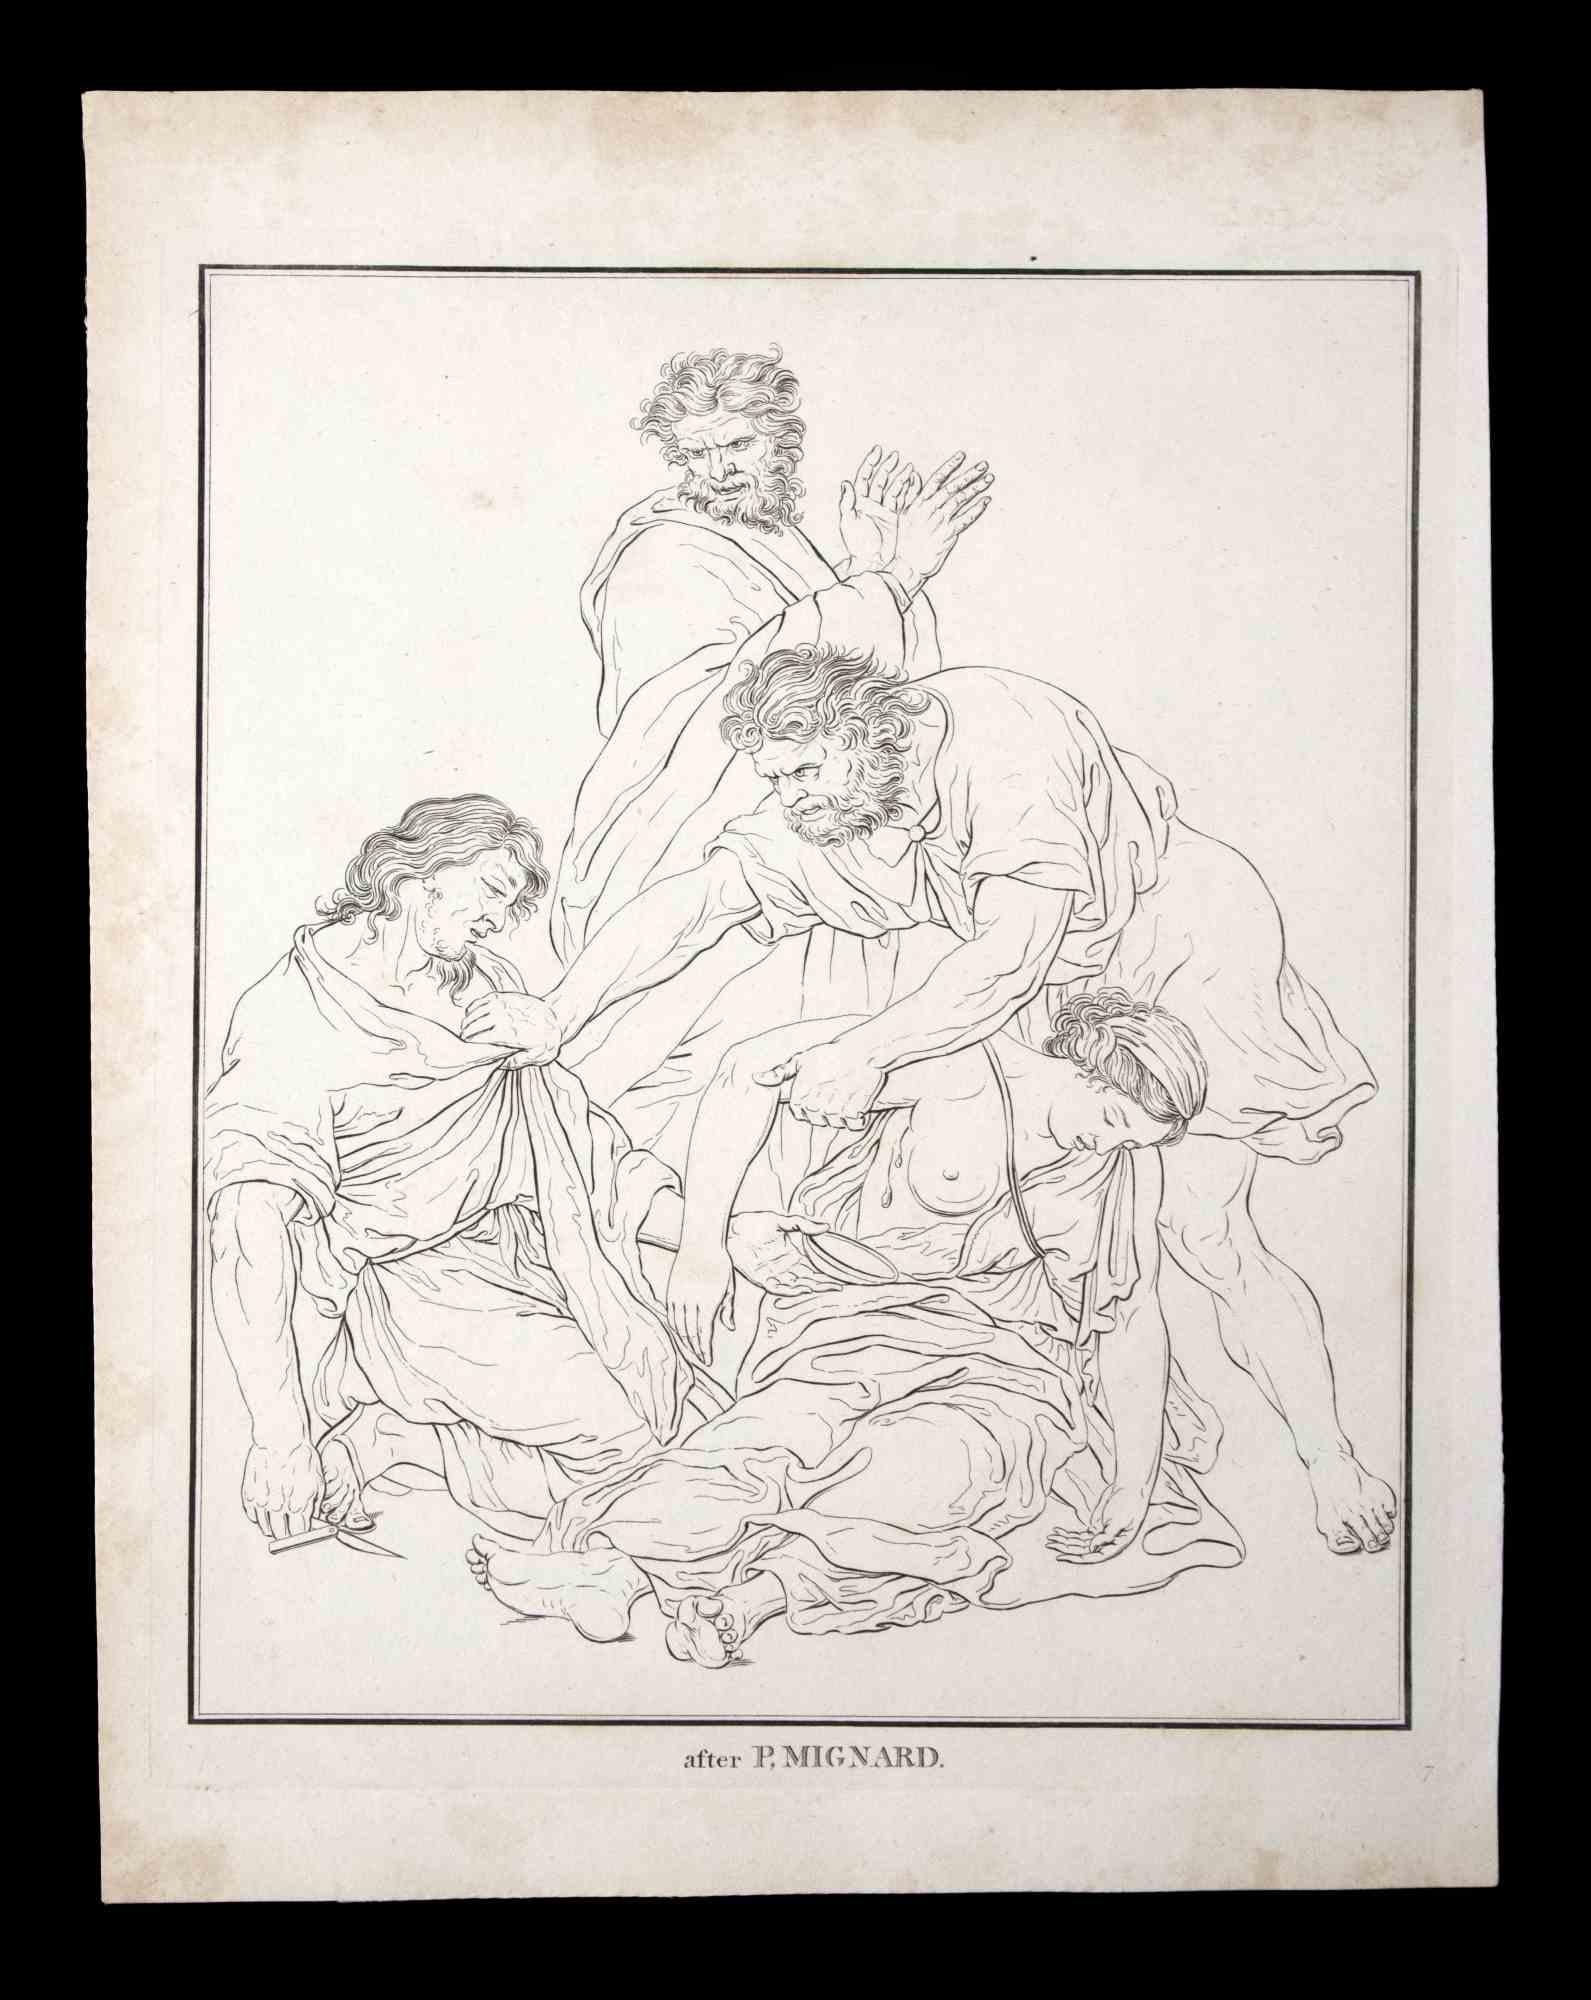 The Surviving is an original etching artwork realized by Thomas Holloway after P. Mignard for Johann Caspar Lavater's "Essays on Physiognomy, Designed to Promote the Knowledge and the Love of Mankind", London, Bensley, 1810. 

Signed on the plate on